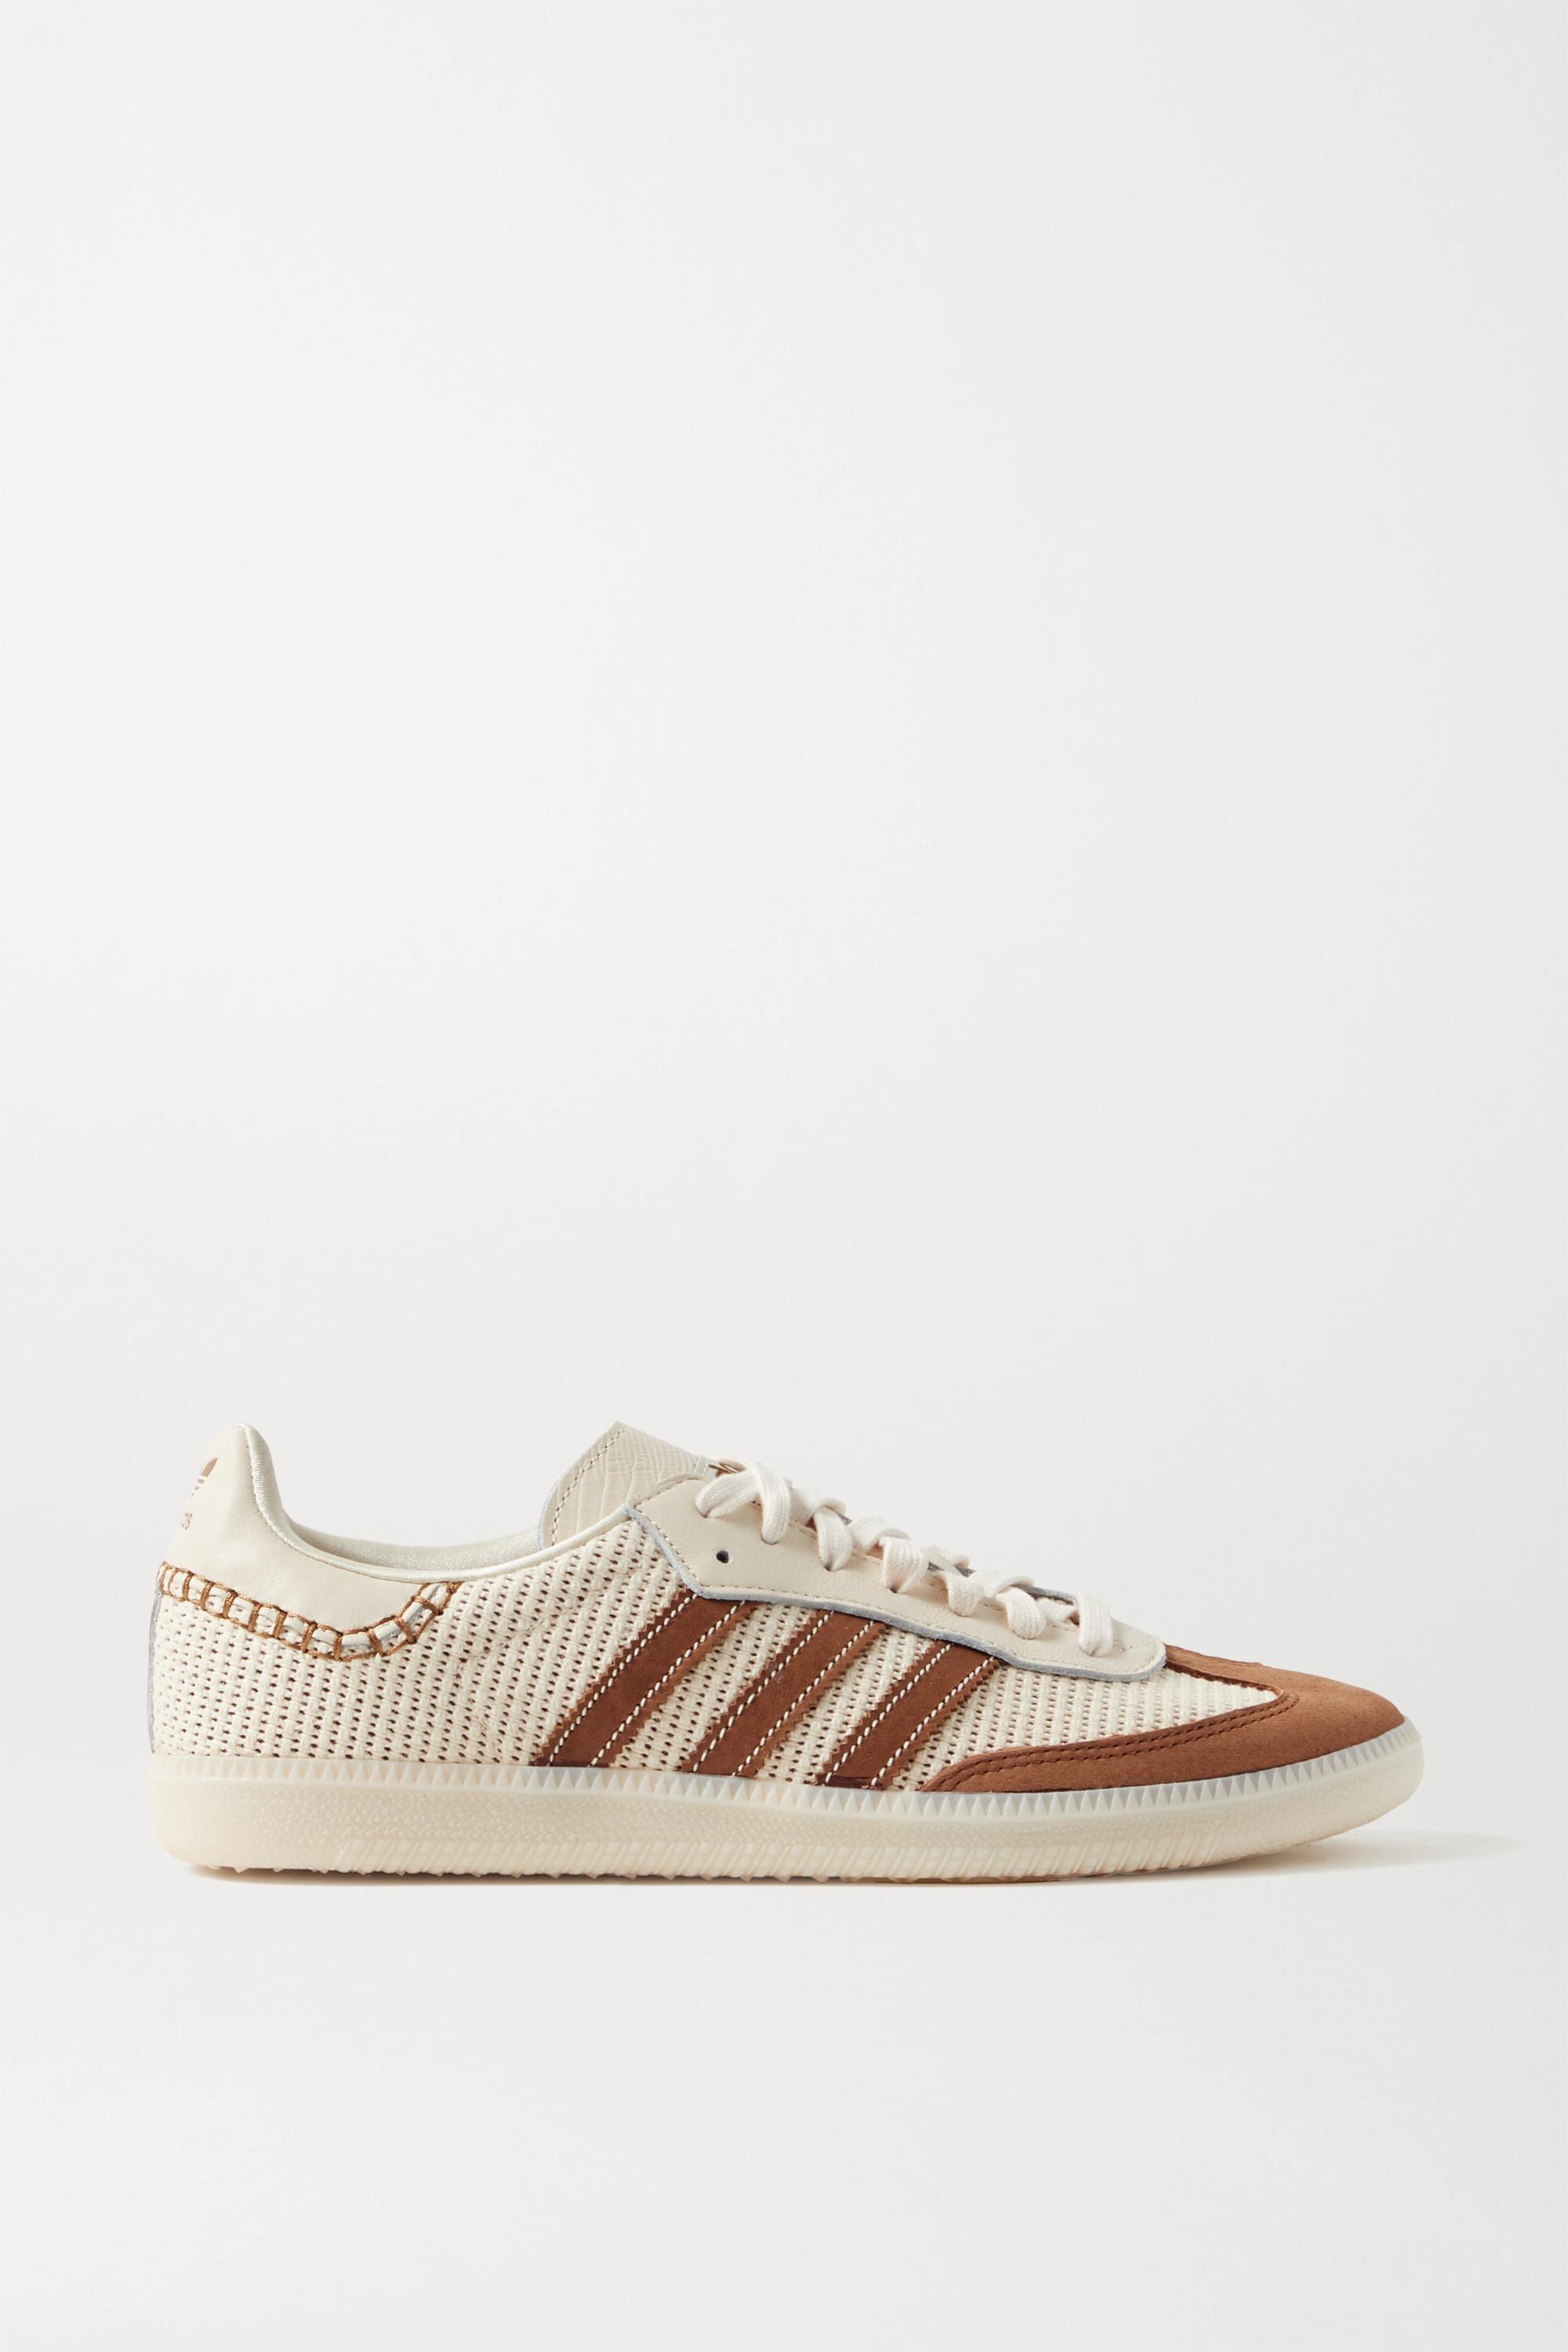 adidas Originals + Wales Bonner Samba Suede, Leather And Mesh Sneakers |  Lyst Canada